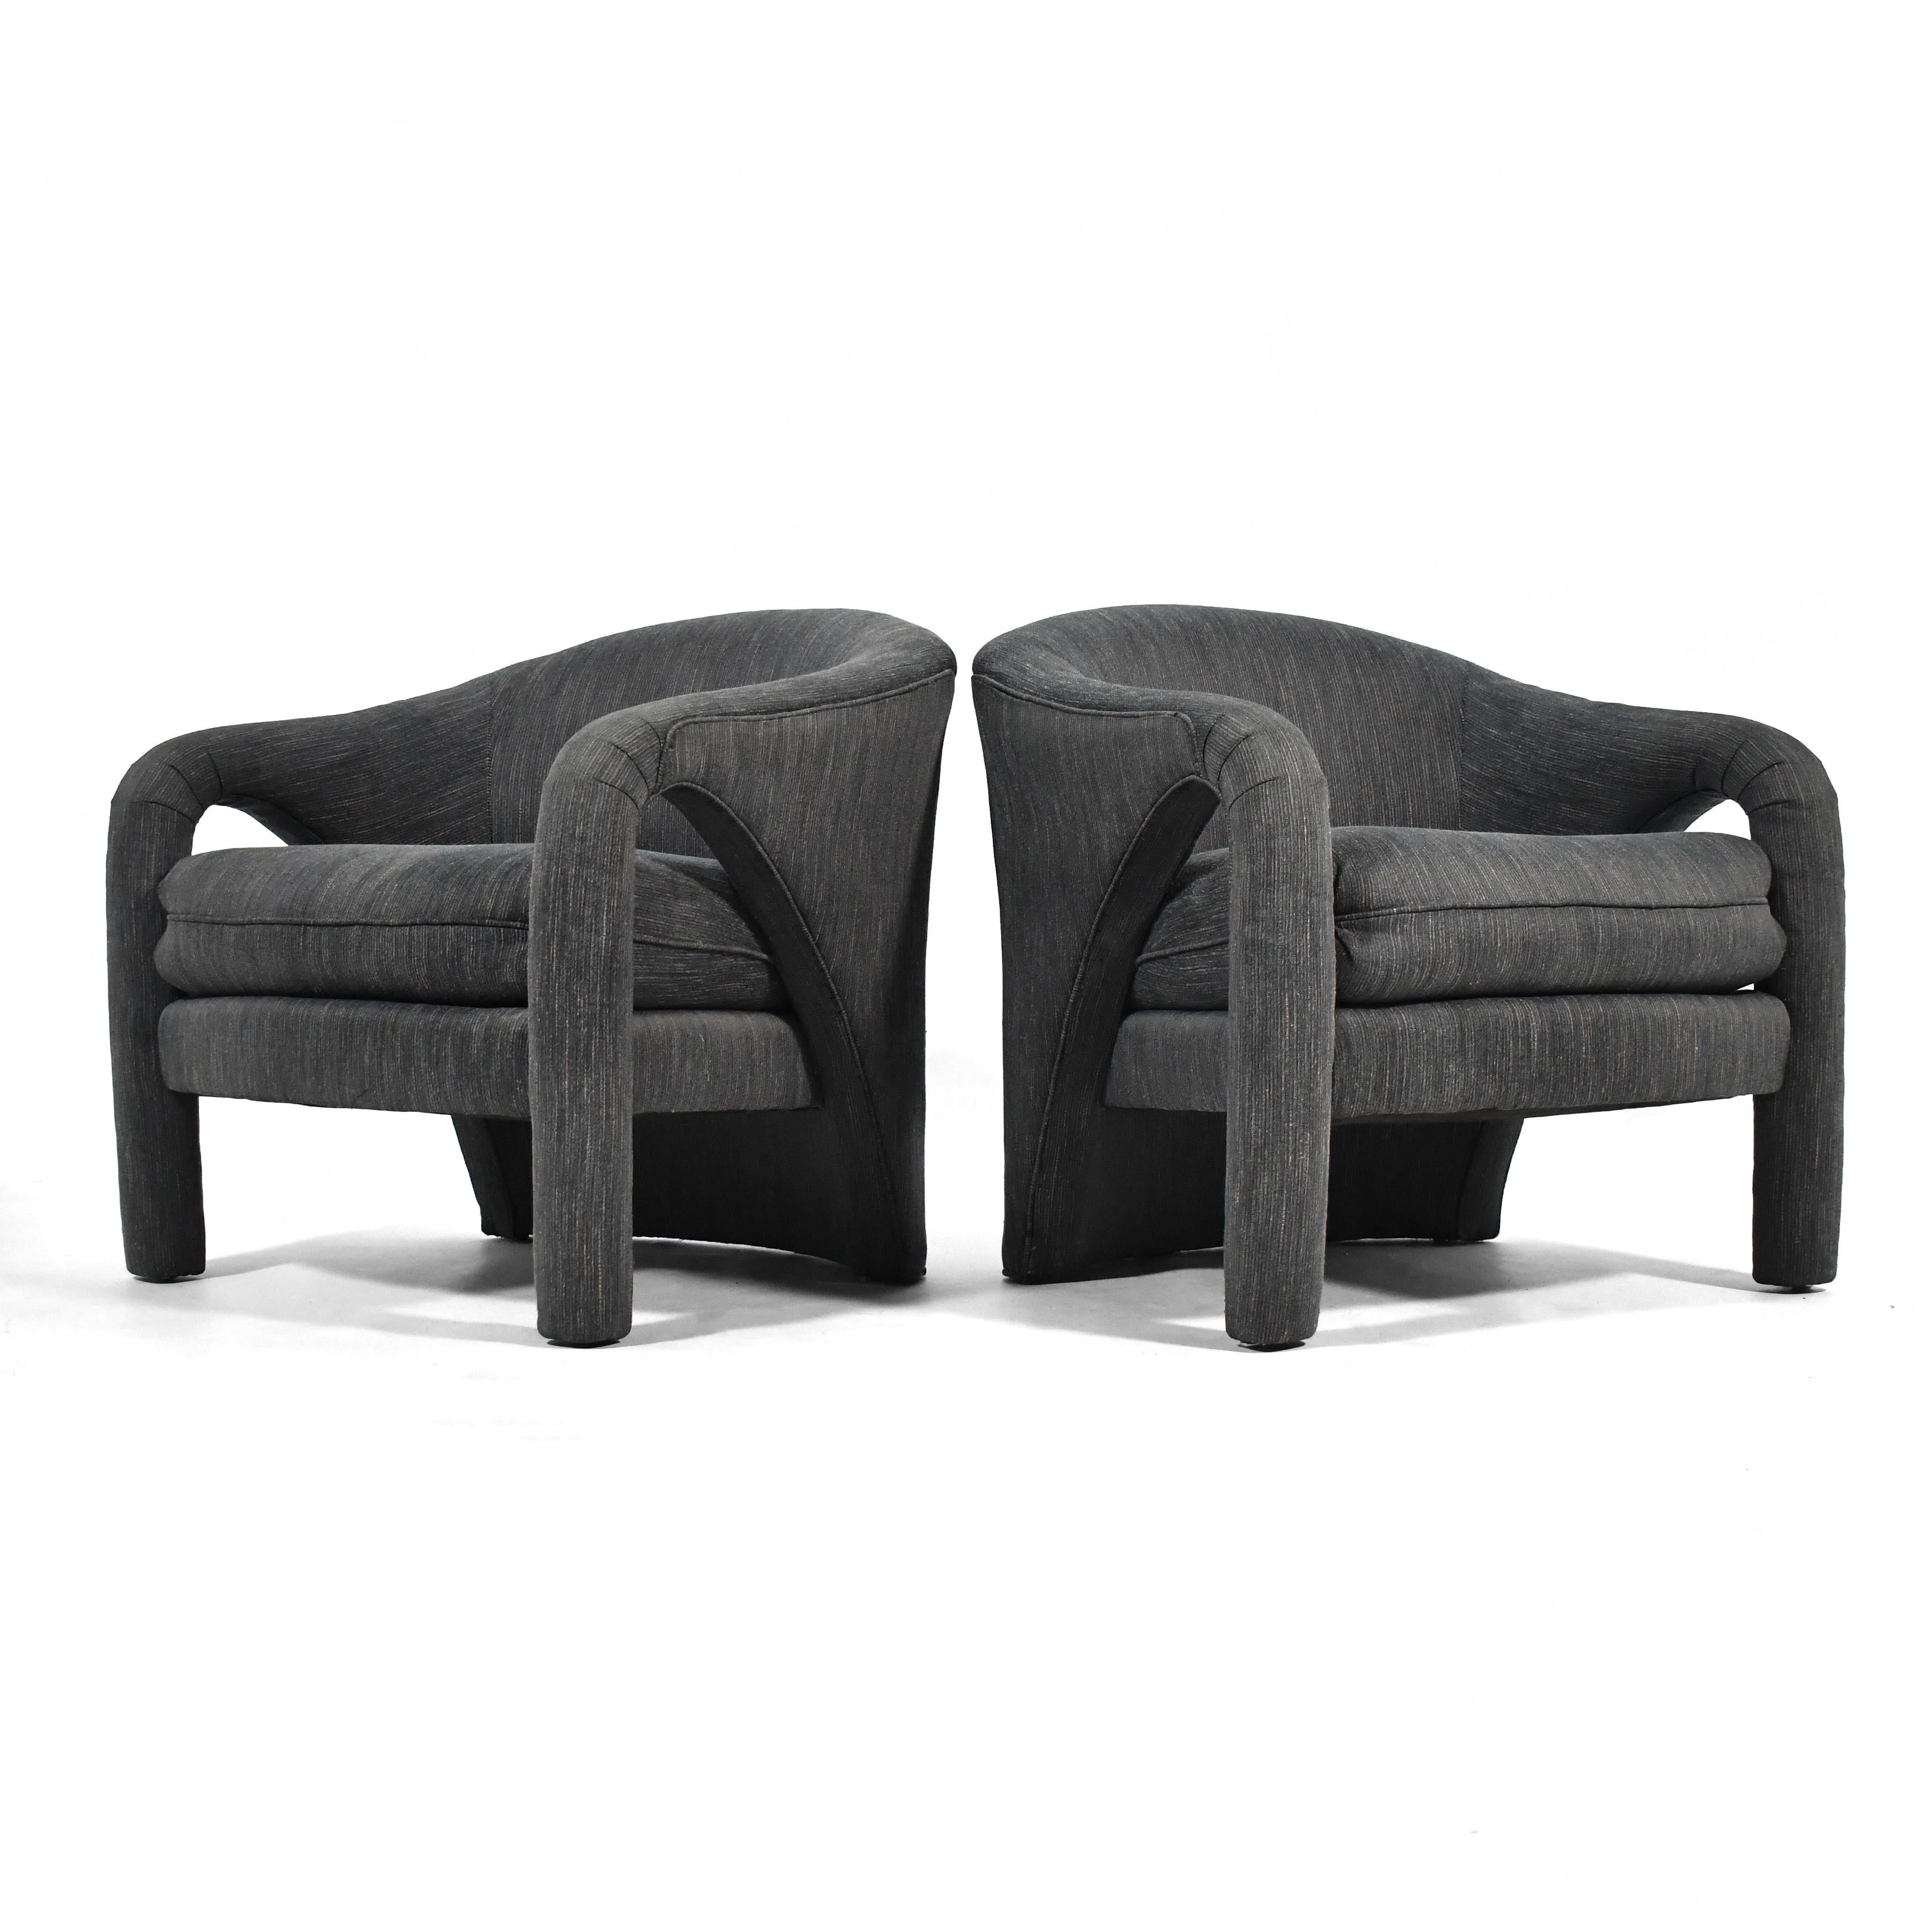 American Pair of Elephant Chairs by Weiman For Sale